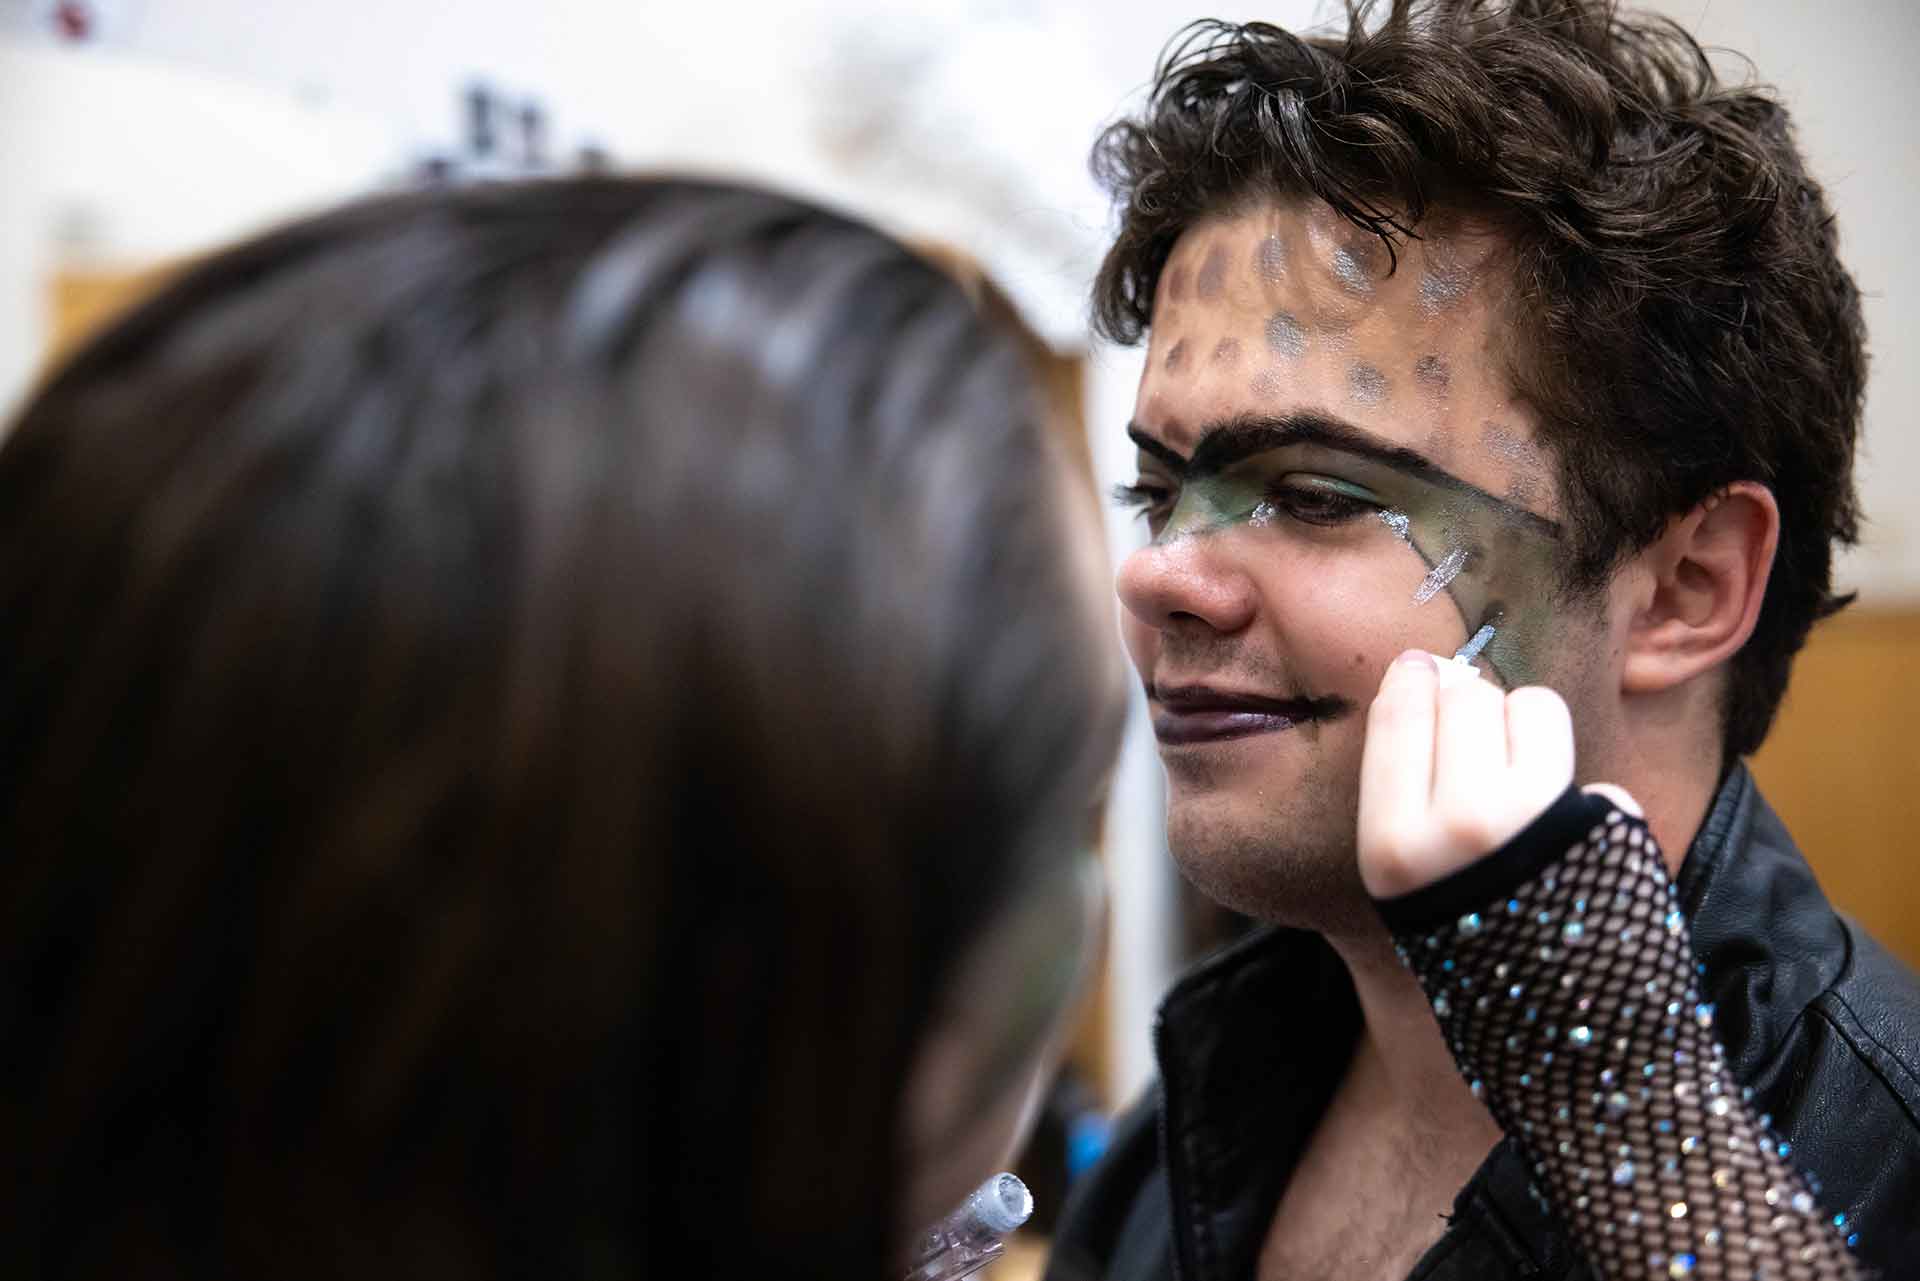 A person applying facepaint to another person